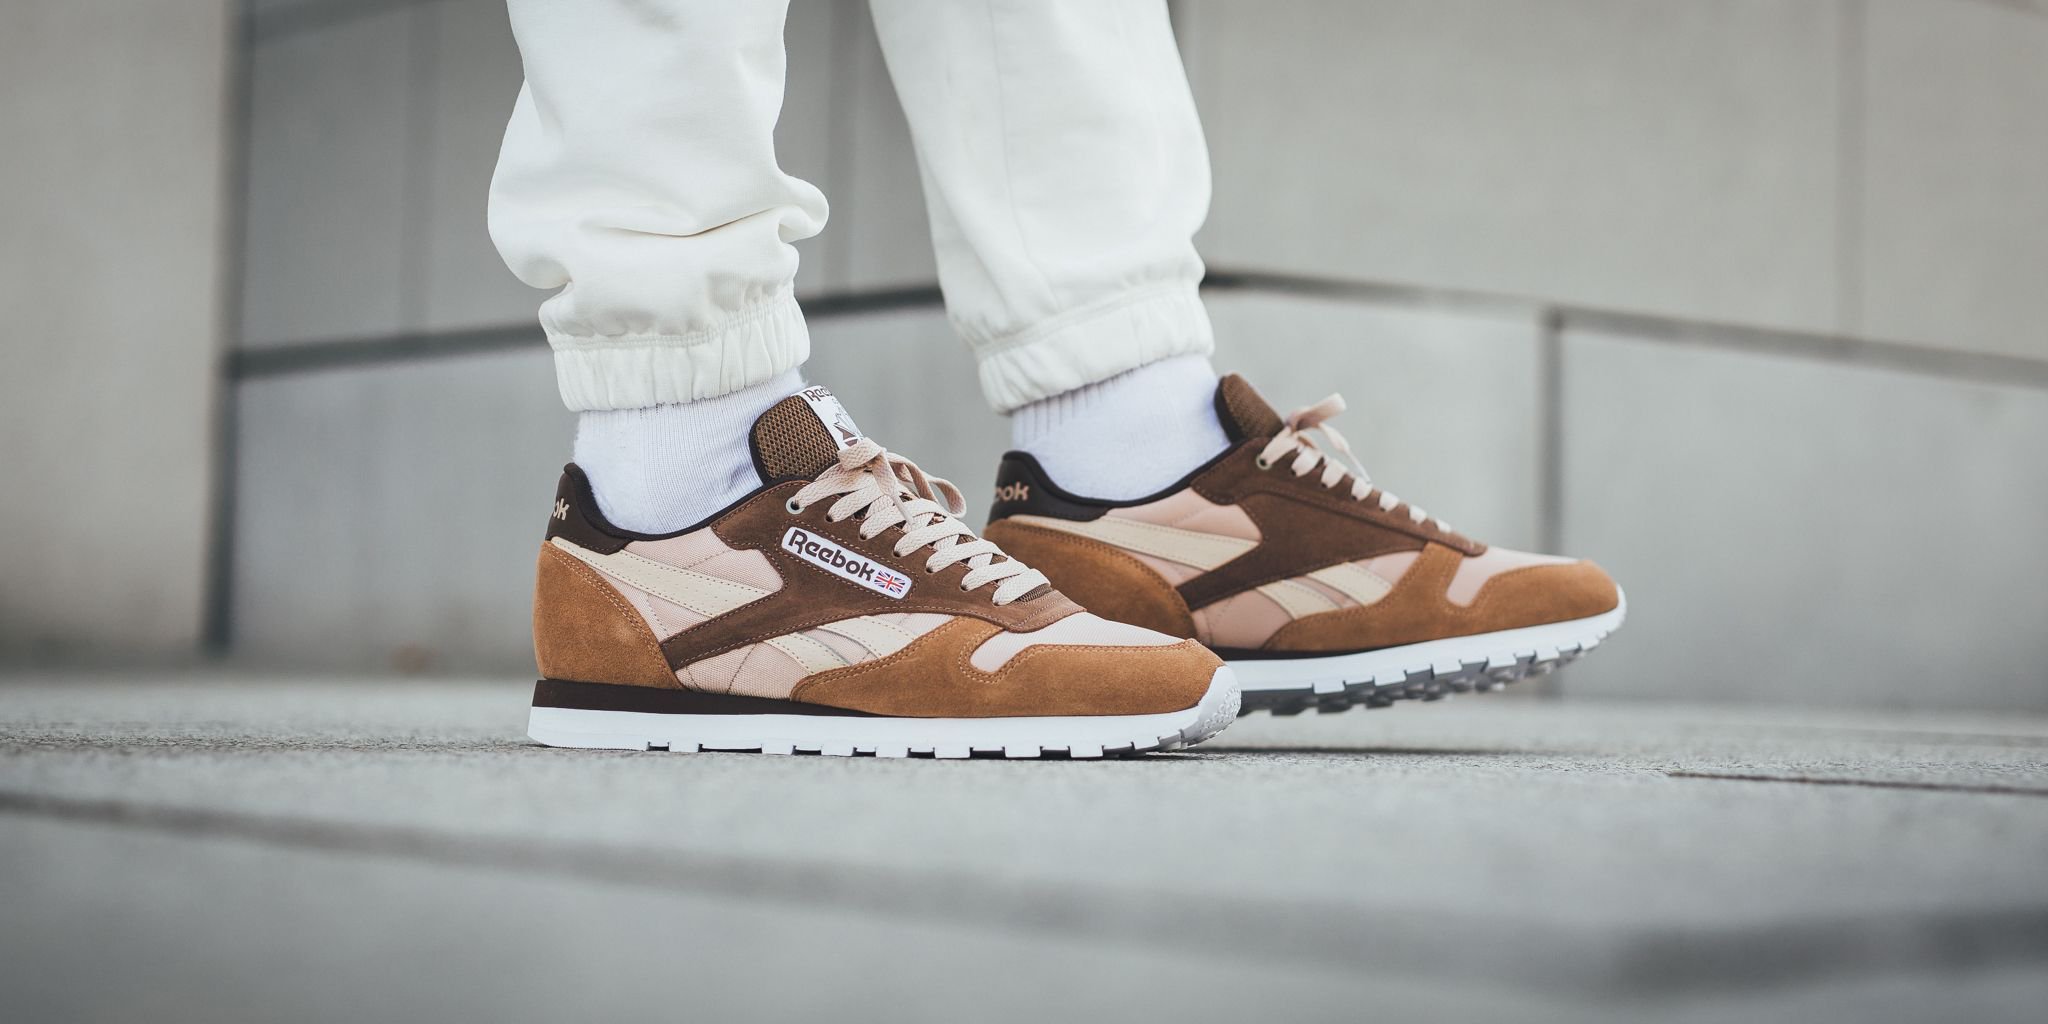 cache baard klink Titolo on Twitter: "coffee time ☕️ Montana-Cans Color System x Reebok  Classic Leather ☕️ Cappuccino/Toffee/Ht SHOP HERE ➡️➡️➡️  https://t.co/bUVwAJGcl1 #montana #montanacans #montanaxreebok #reebok  #reebokclassics https://t.co/AUl1gqPjCy ...